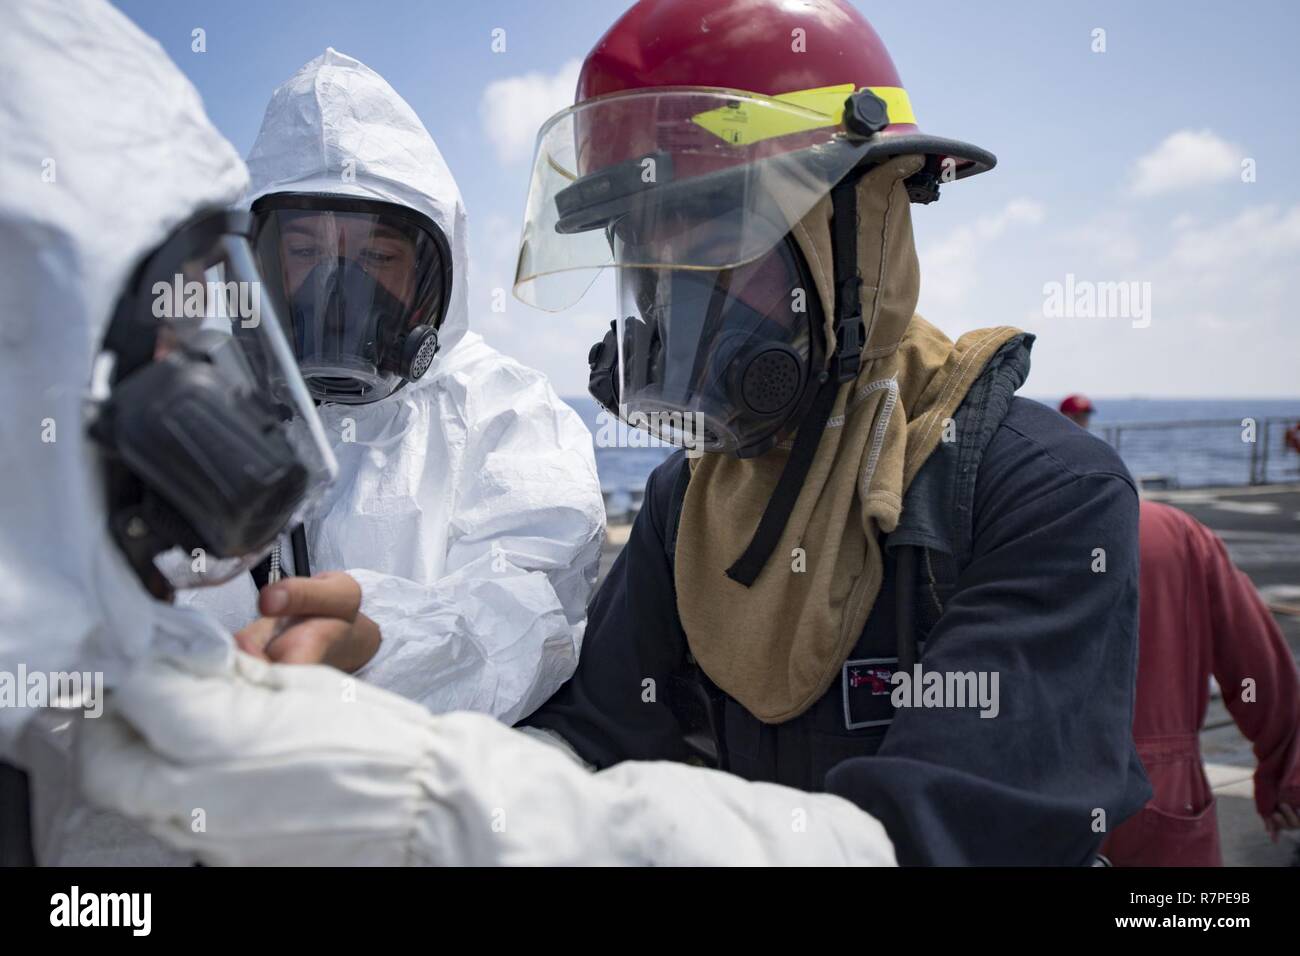 SOUTH CHINA SEA (March 20, 2017) Sailors help each other don protective gear during a toxic gas drill aboard Arleigh Burke-class guided-missile destroyer USS Michael Murphy (DDG 112). Michael Murphy is on a regularly scheduled Western Pacific deployment with the Carl Vinson Carrier Strike Group as part of the U.S. Pacific Fleet-led initiative to extend the command and control functions of U.S. 3rd Fleet. U.S. Navy aircraft carrier strike groups have patrolled the Indo-Asia-Pacific regularly and routinely for more than 70 years. Stock Photo